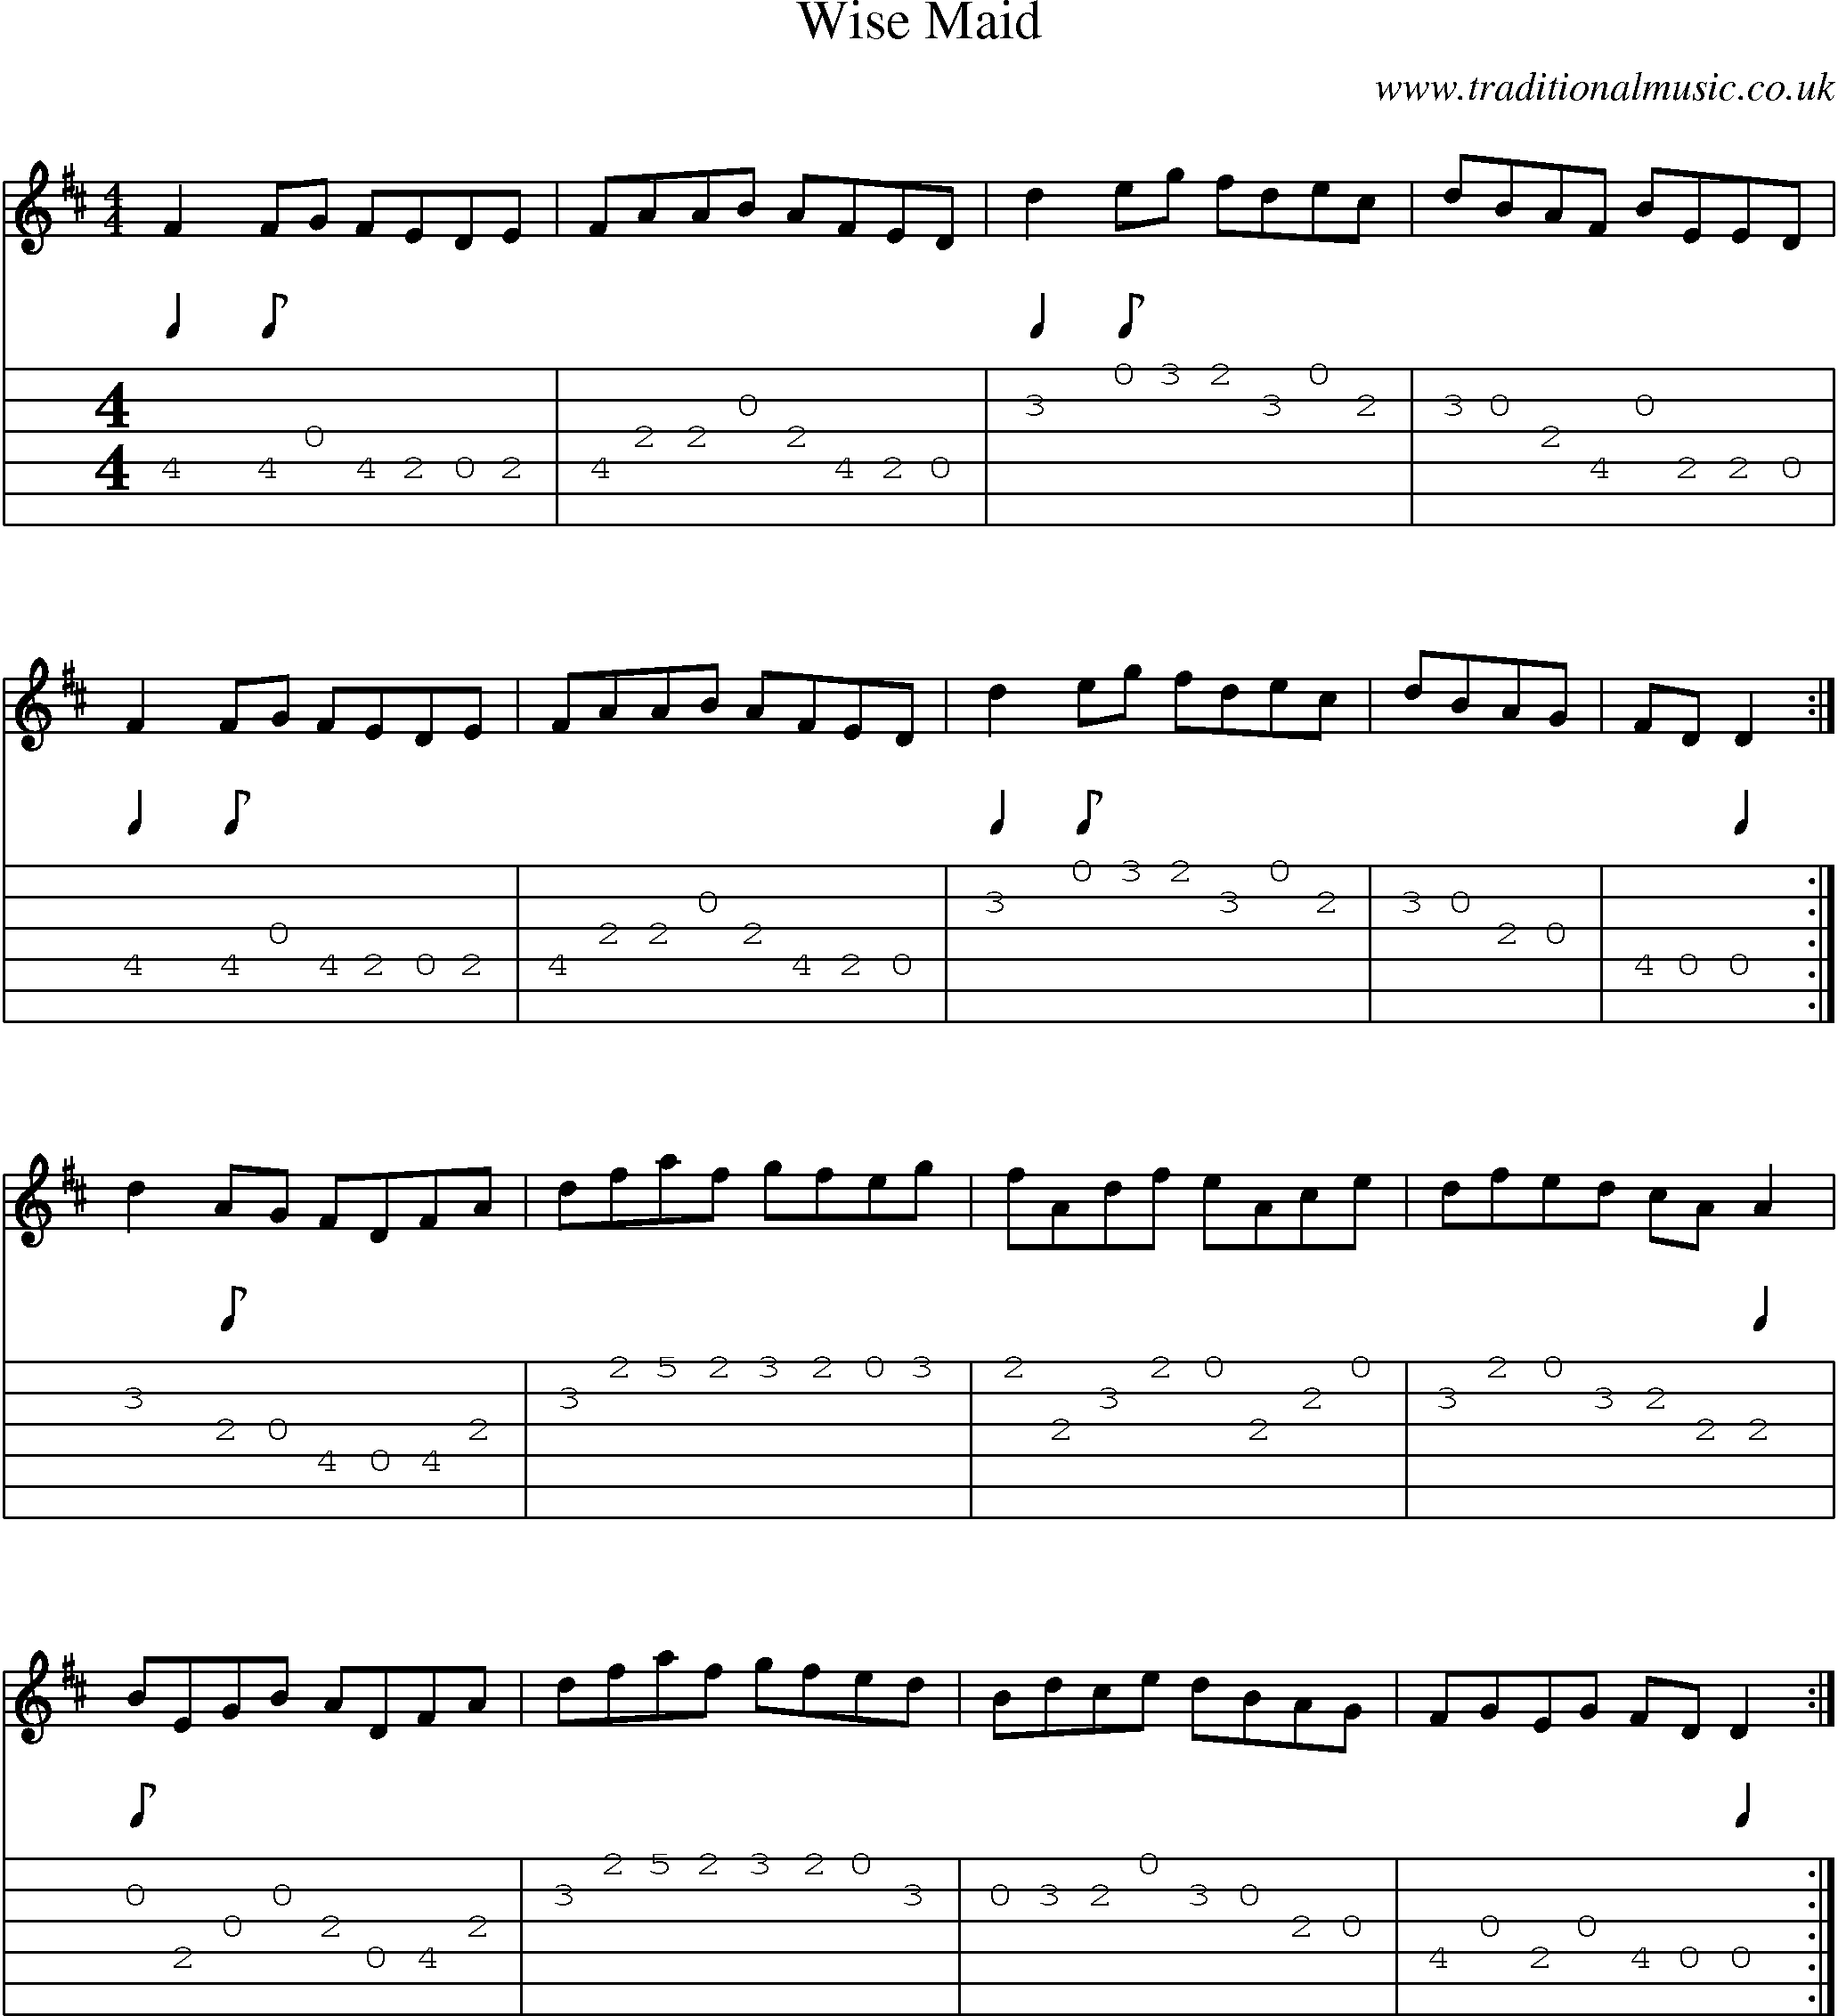 Music Score and Guitar Tabs for Wise Maid